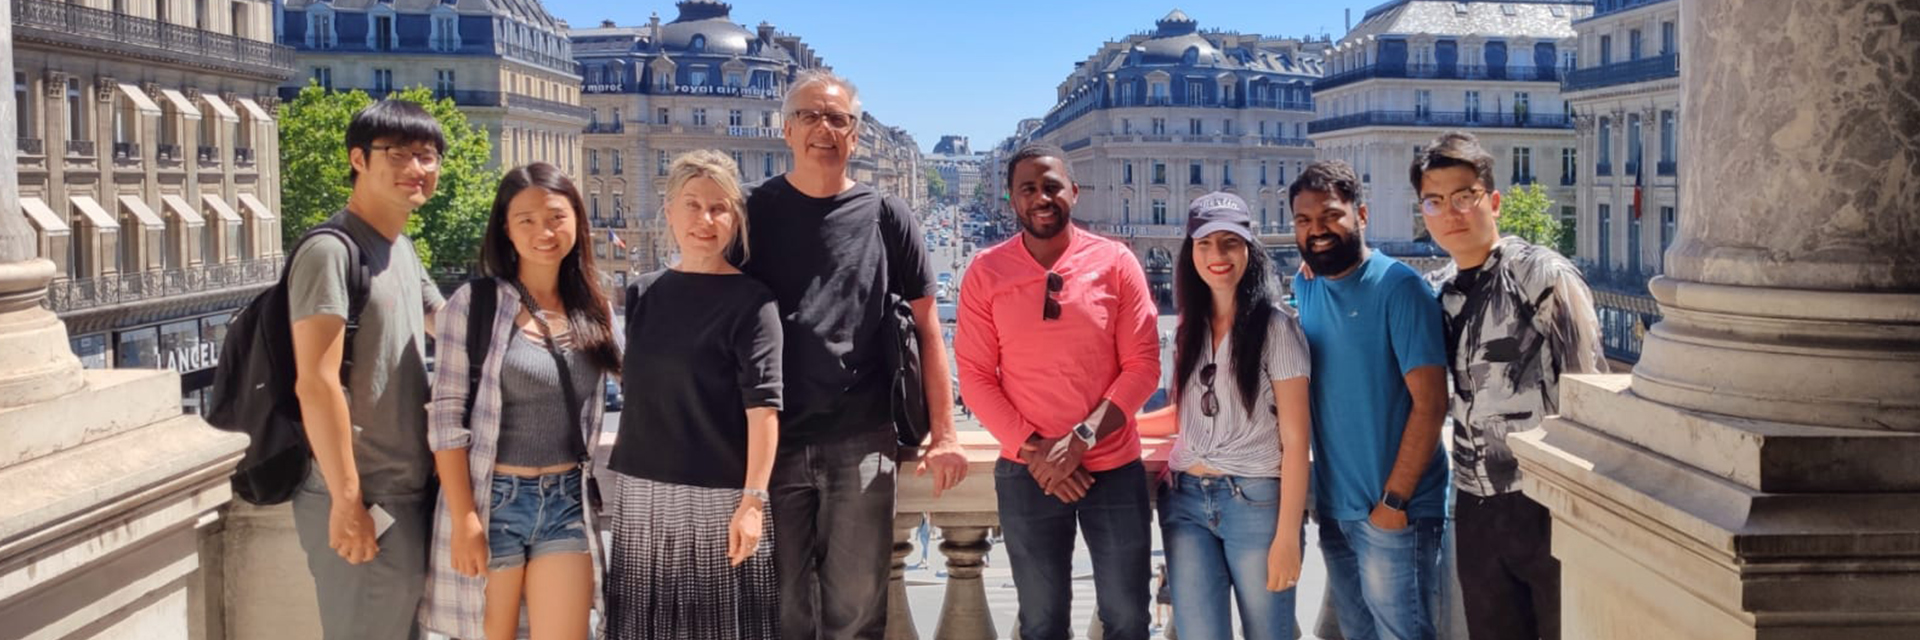 Summer 2019 Modern Architecture in the Modern City group photo in Paris